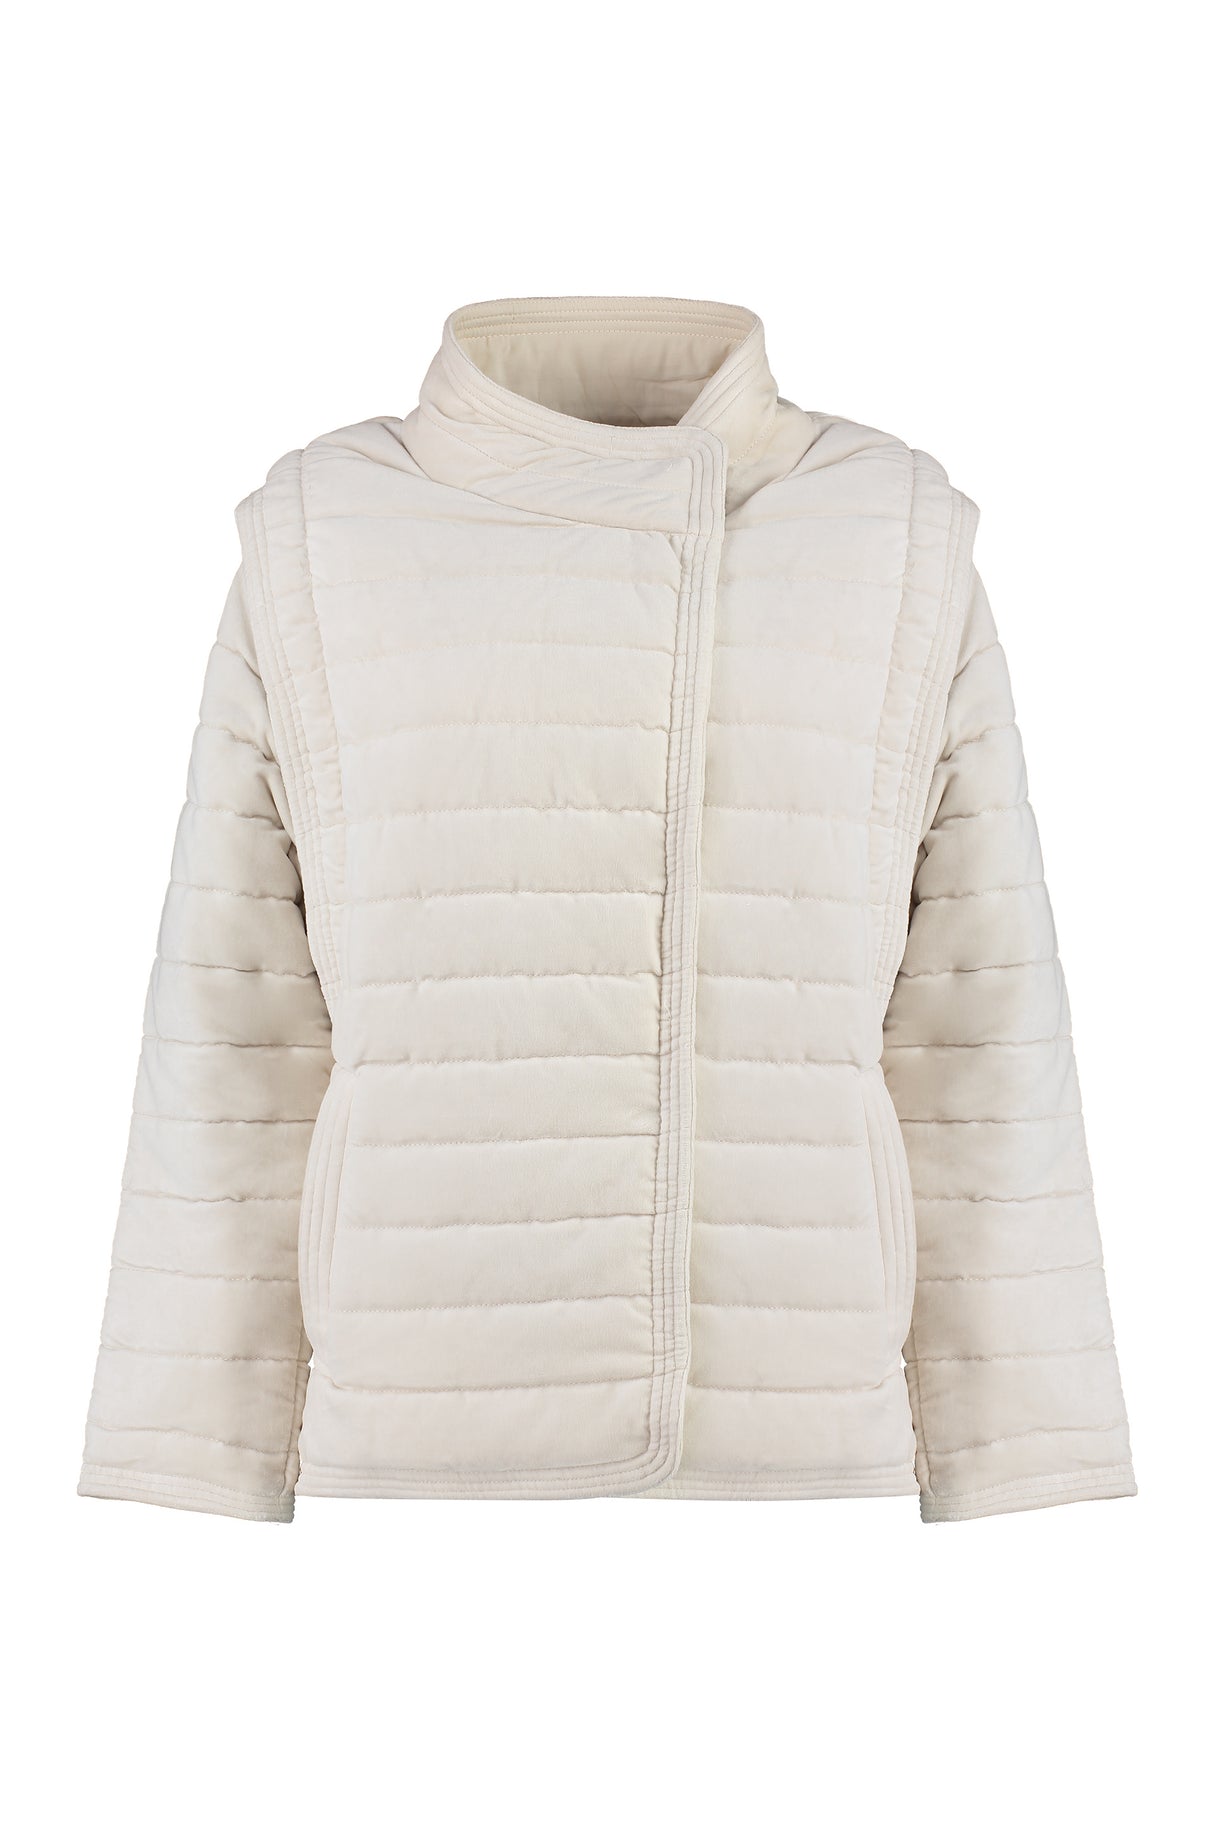 Ecru Padded Jacket with Removable Sleeves for Women - FW23 Collection